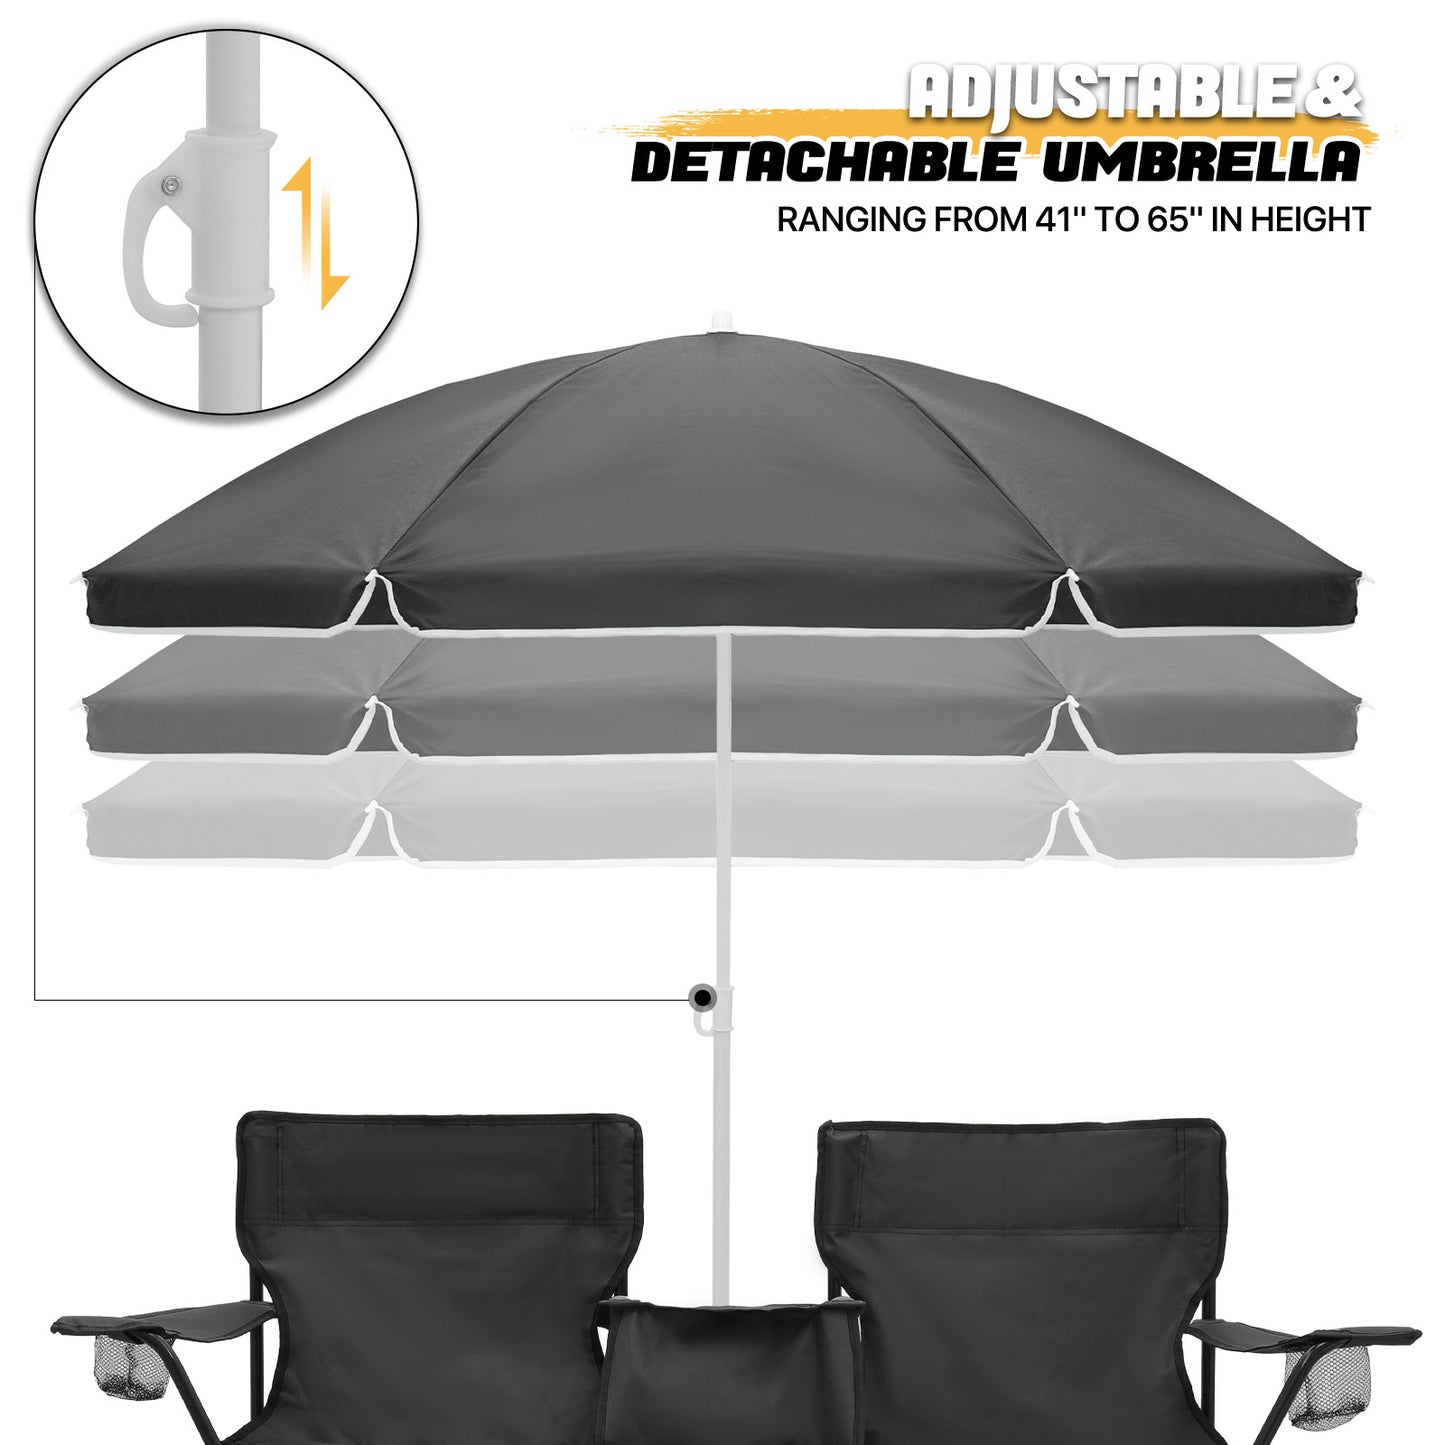 Double Chair With Umbrella - Steel Tube - Oxford Fabric